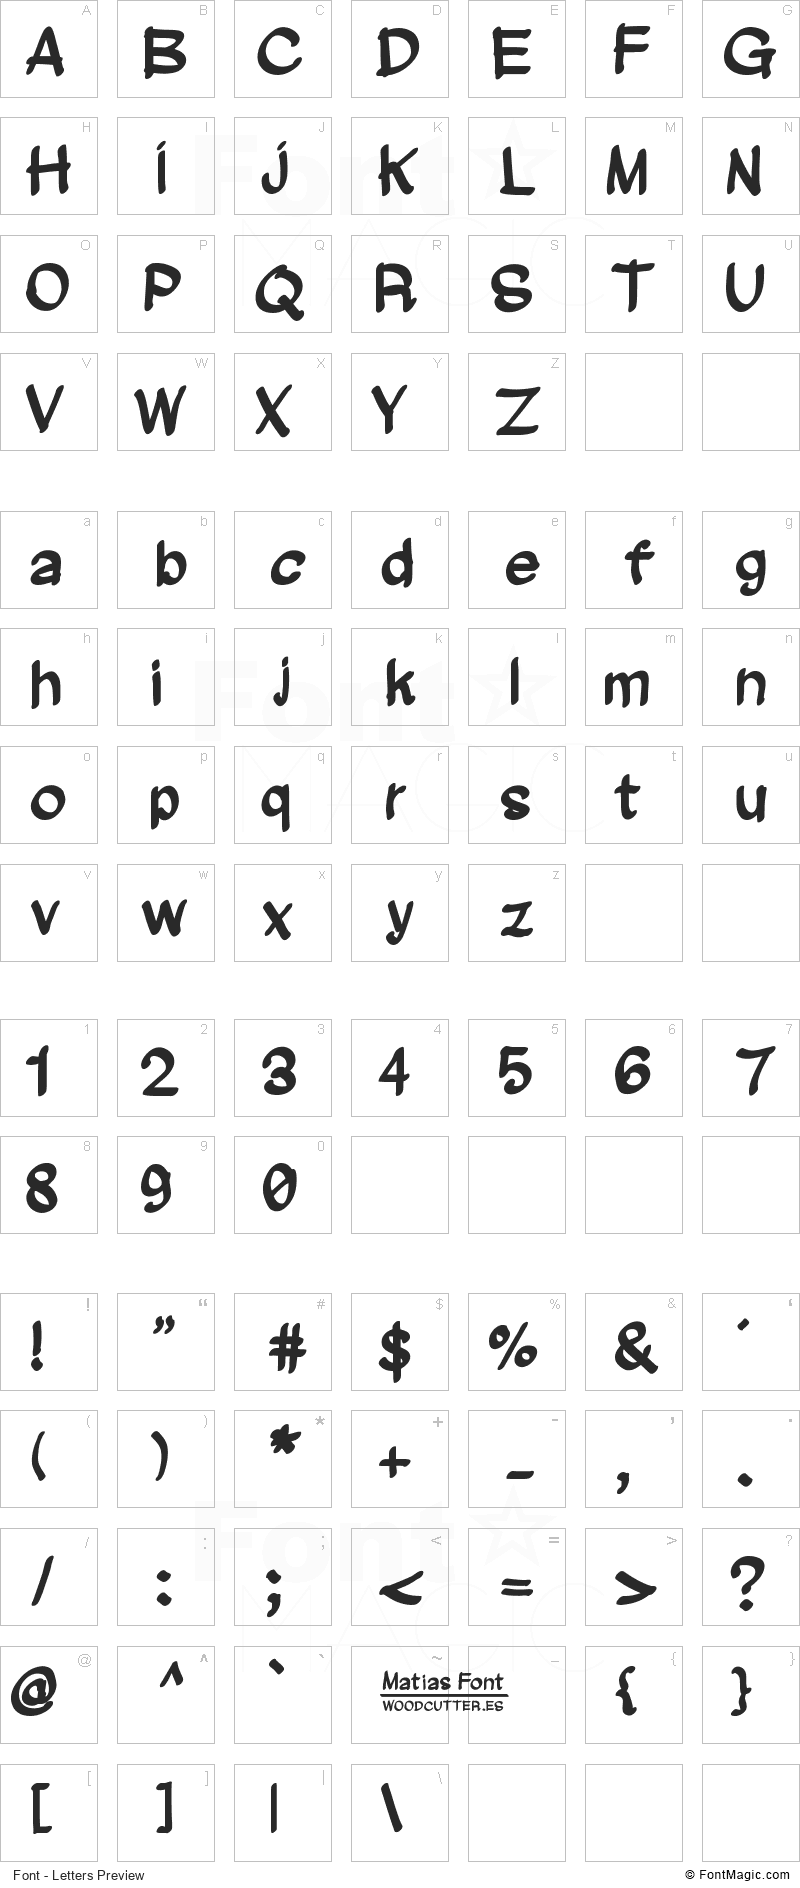 Matias Font - All Latters Preview Chart